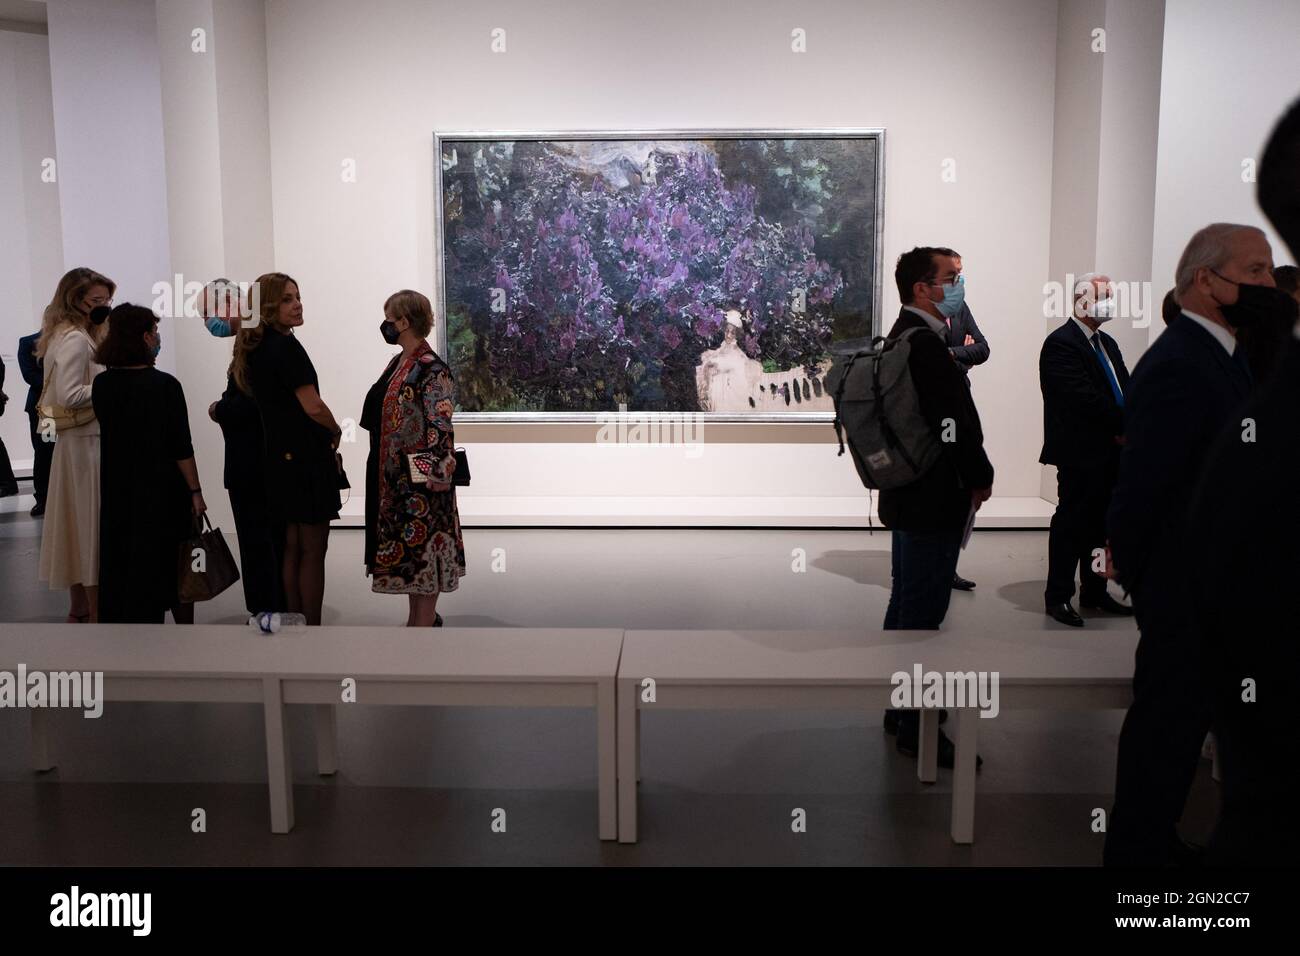 Paris, France on September 21, 2021. Visiteurs during the opening of the exhibition of 'The Morozov Collection, Icons of Modern Art' at Fondation Louis Vuitton in Paris, France on September 21, 2021. Photo by Romain Gaillard/Pool/ABACAPRESS.COM Stock Photo